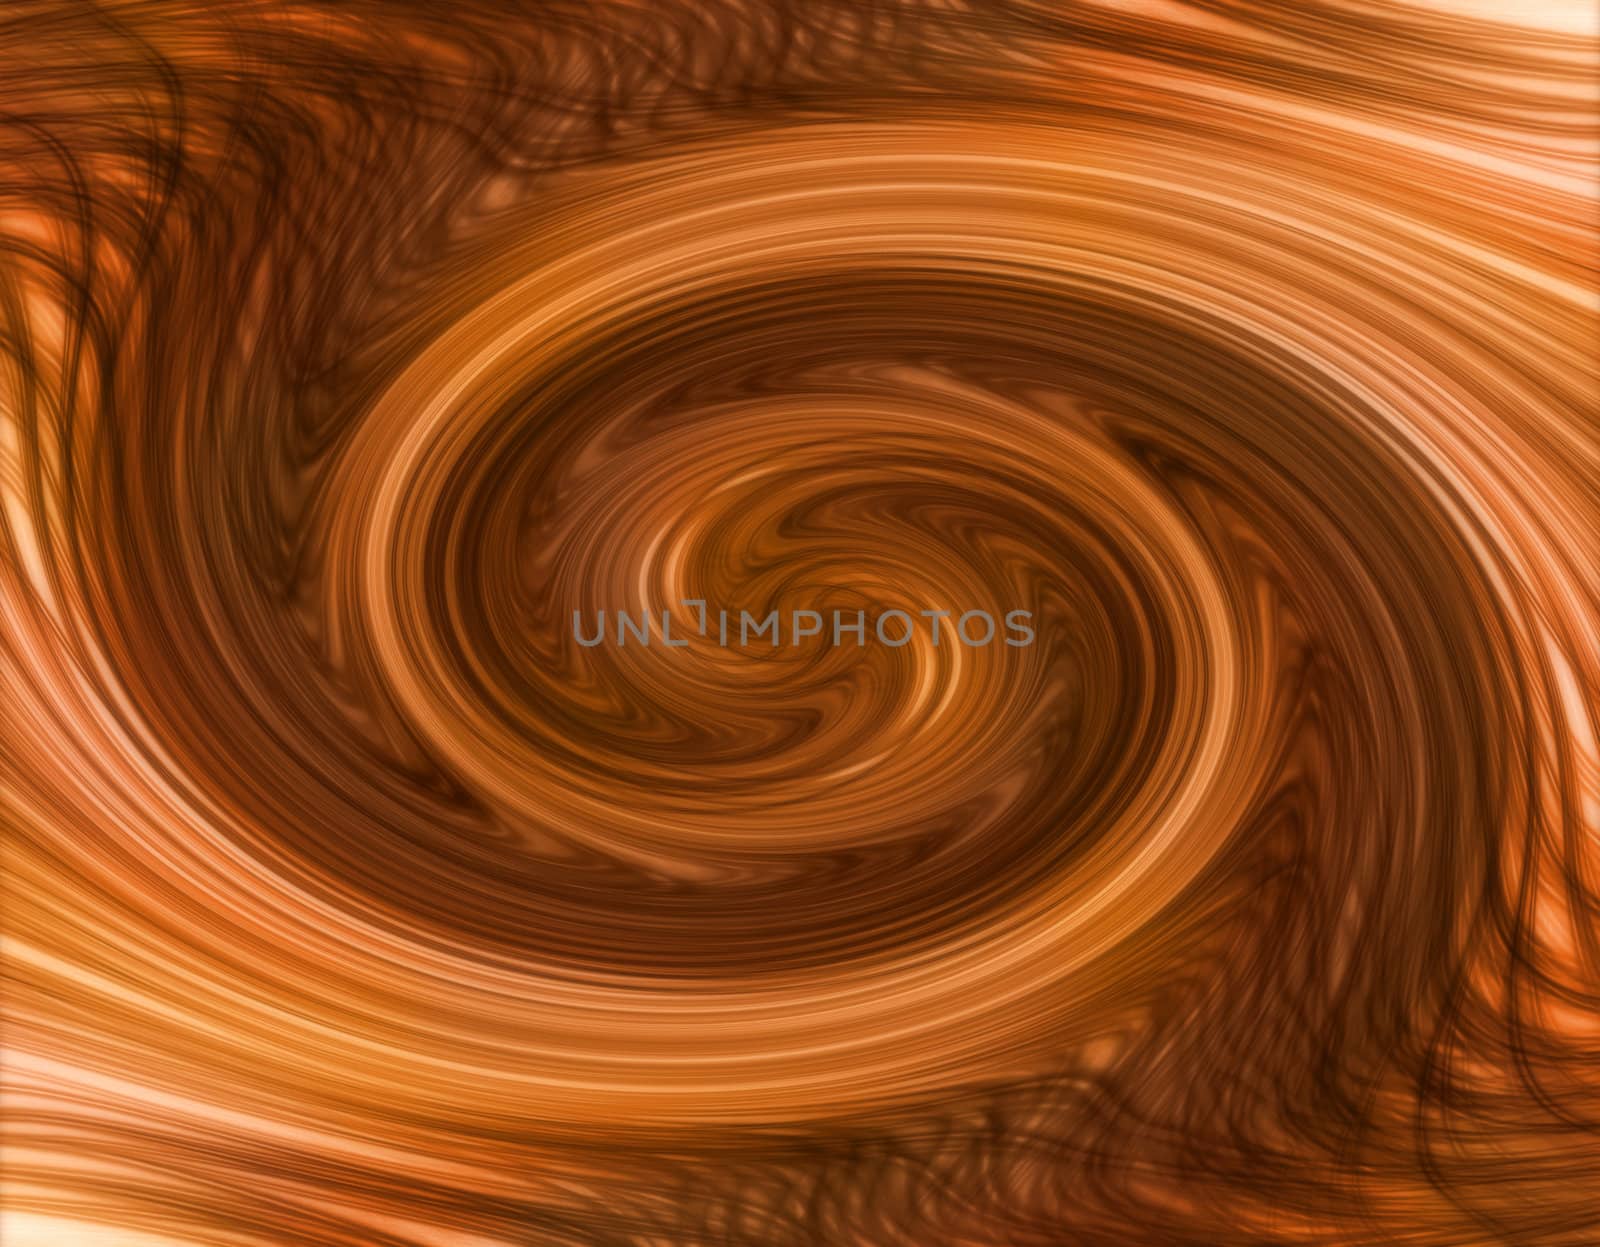 Abstract swirled backgroung in brown colors